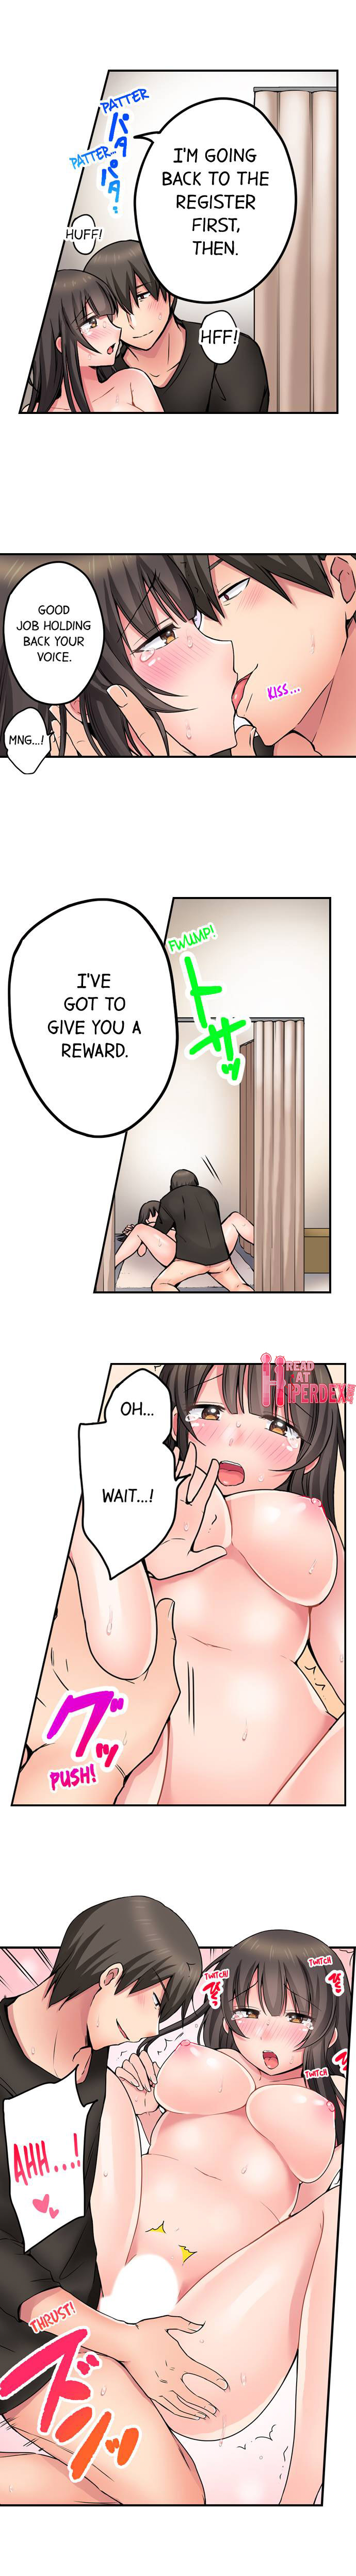 Xem ảnh You Stole Condoms, So I Can Steal Your Virginity, Right Raw - Chapter 08 - TfaYgBRm0eJPwiW - Hentai24h.Tv